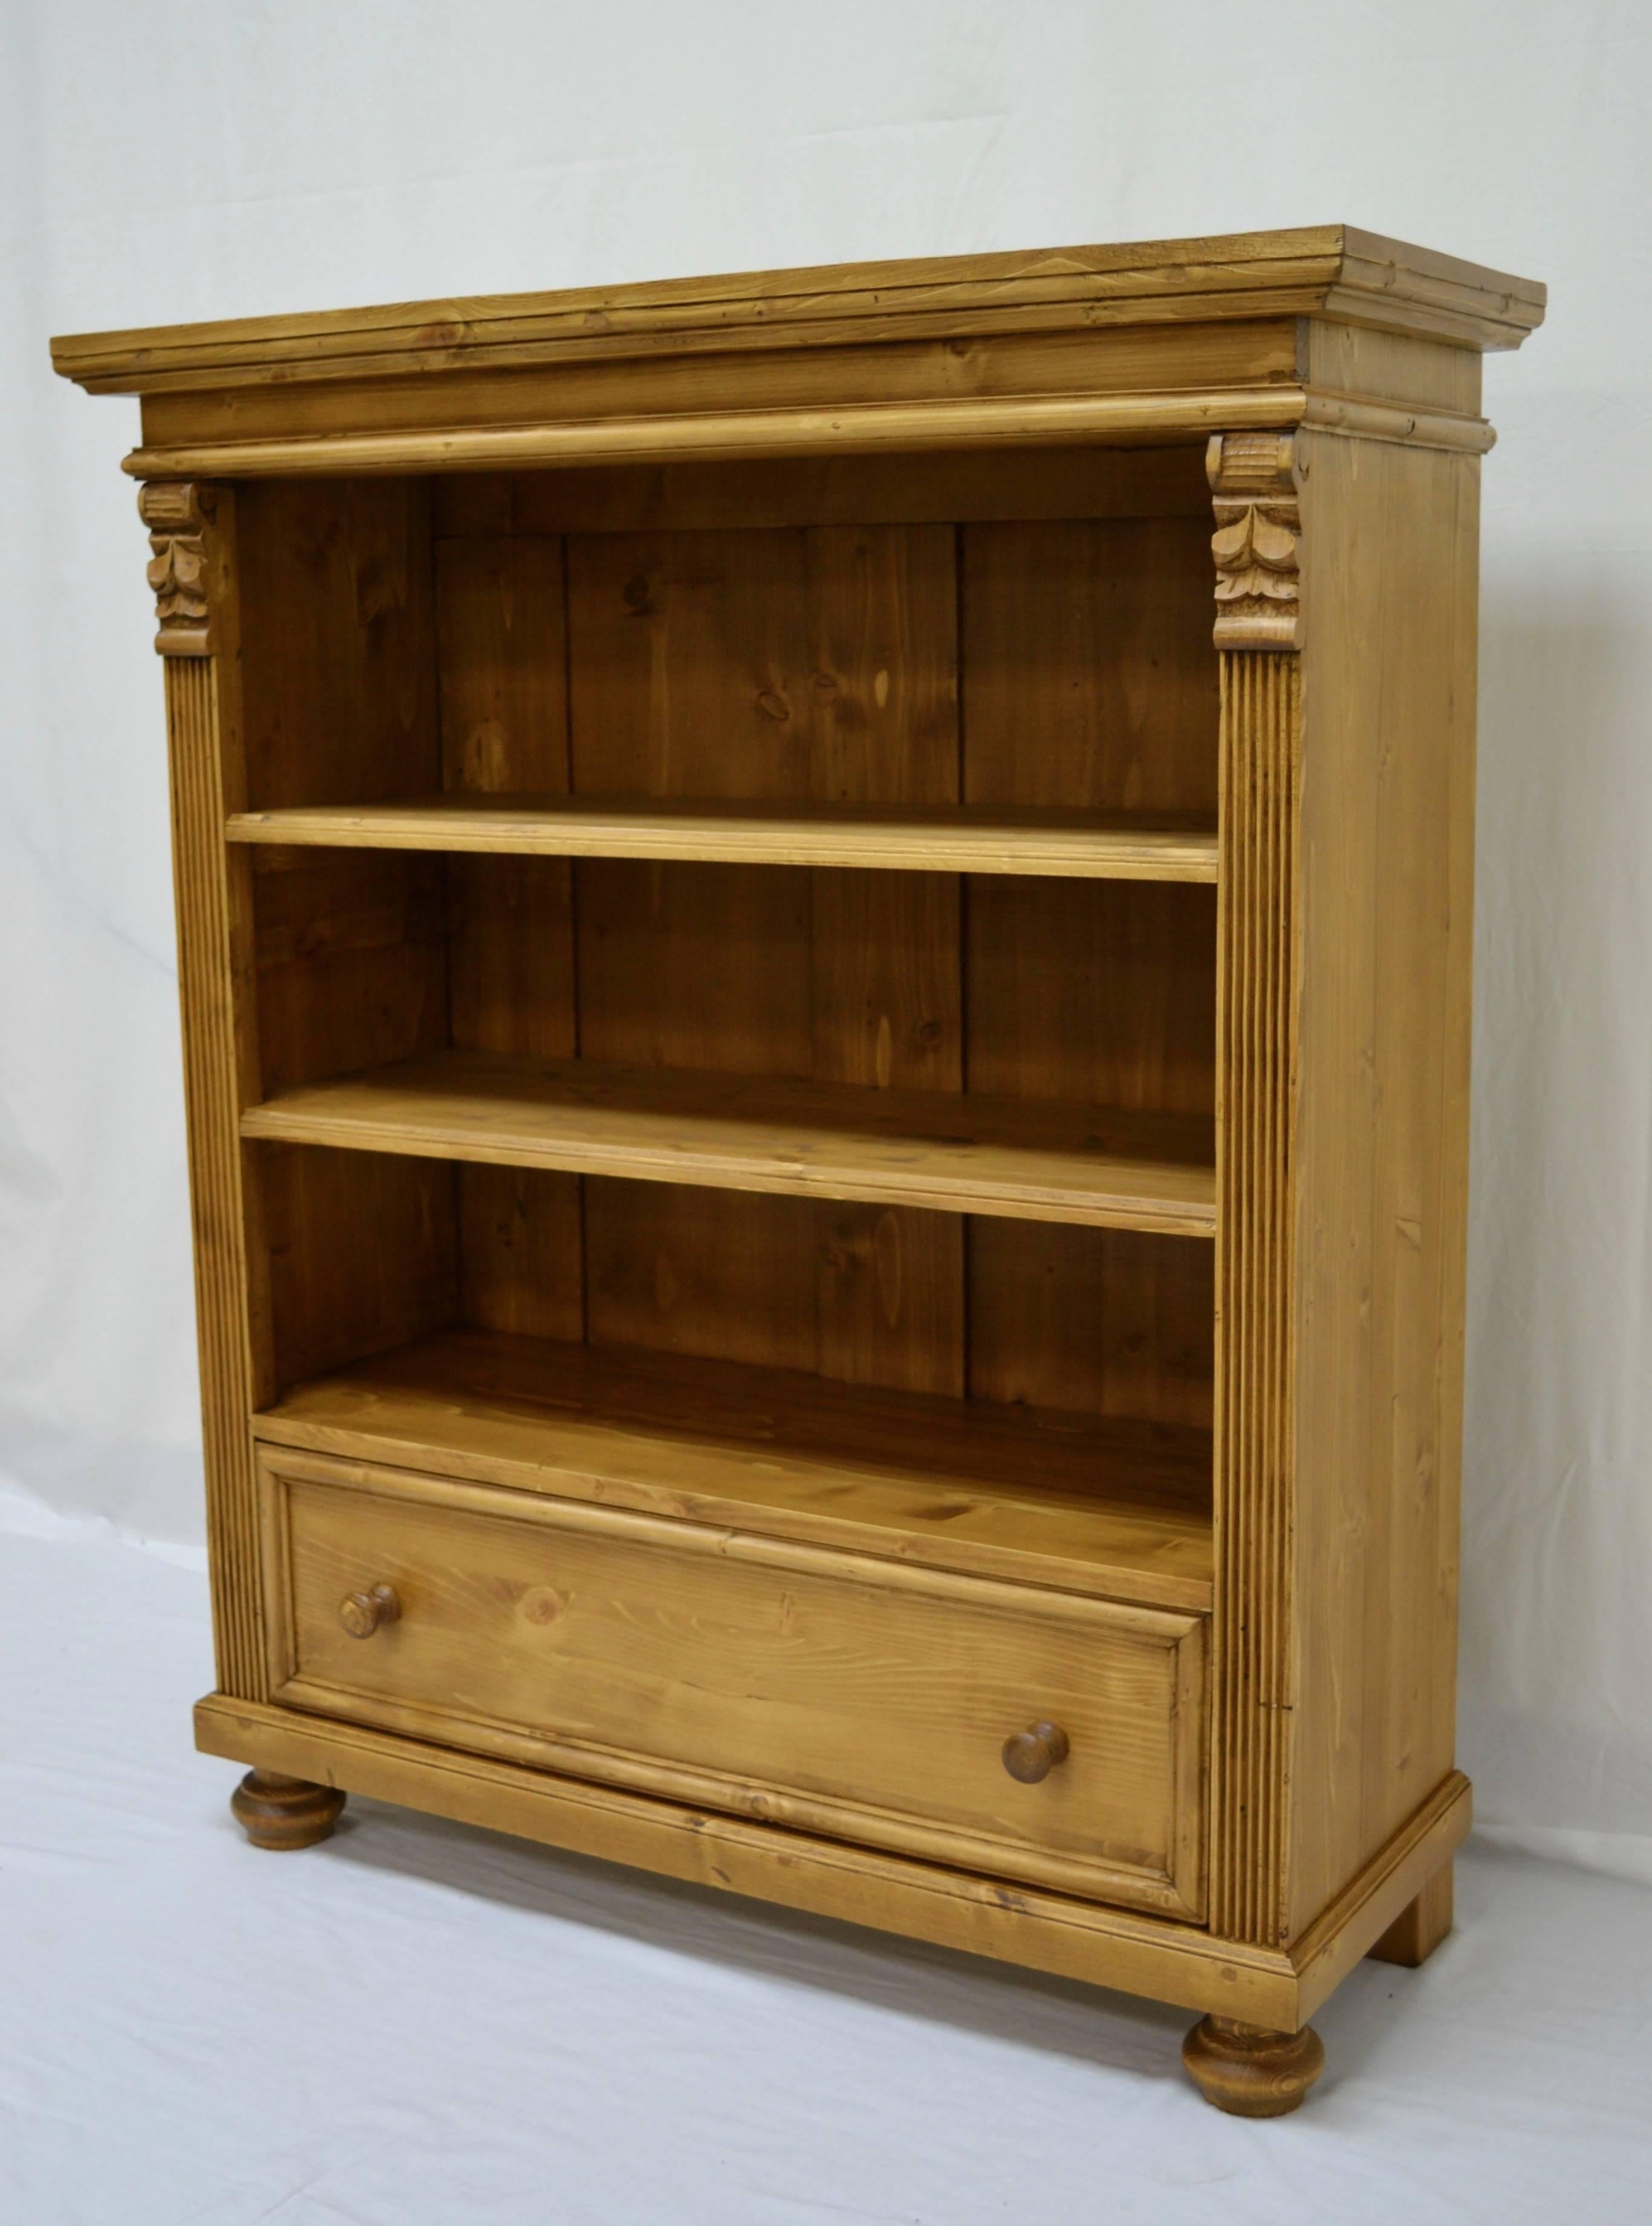 Polished Pine Bookcase with Drawer